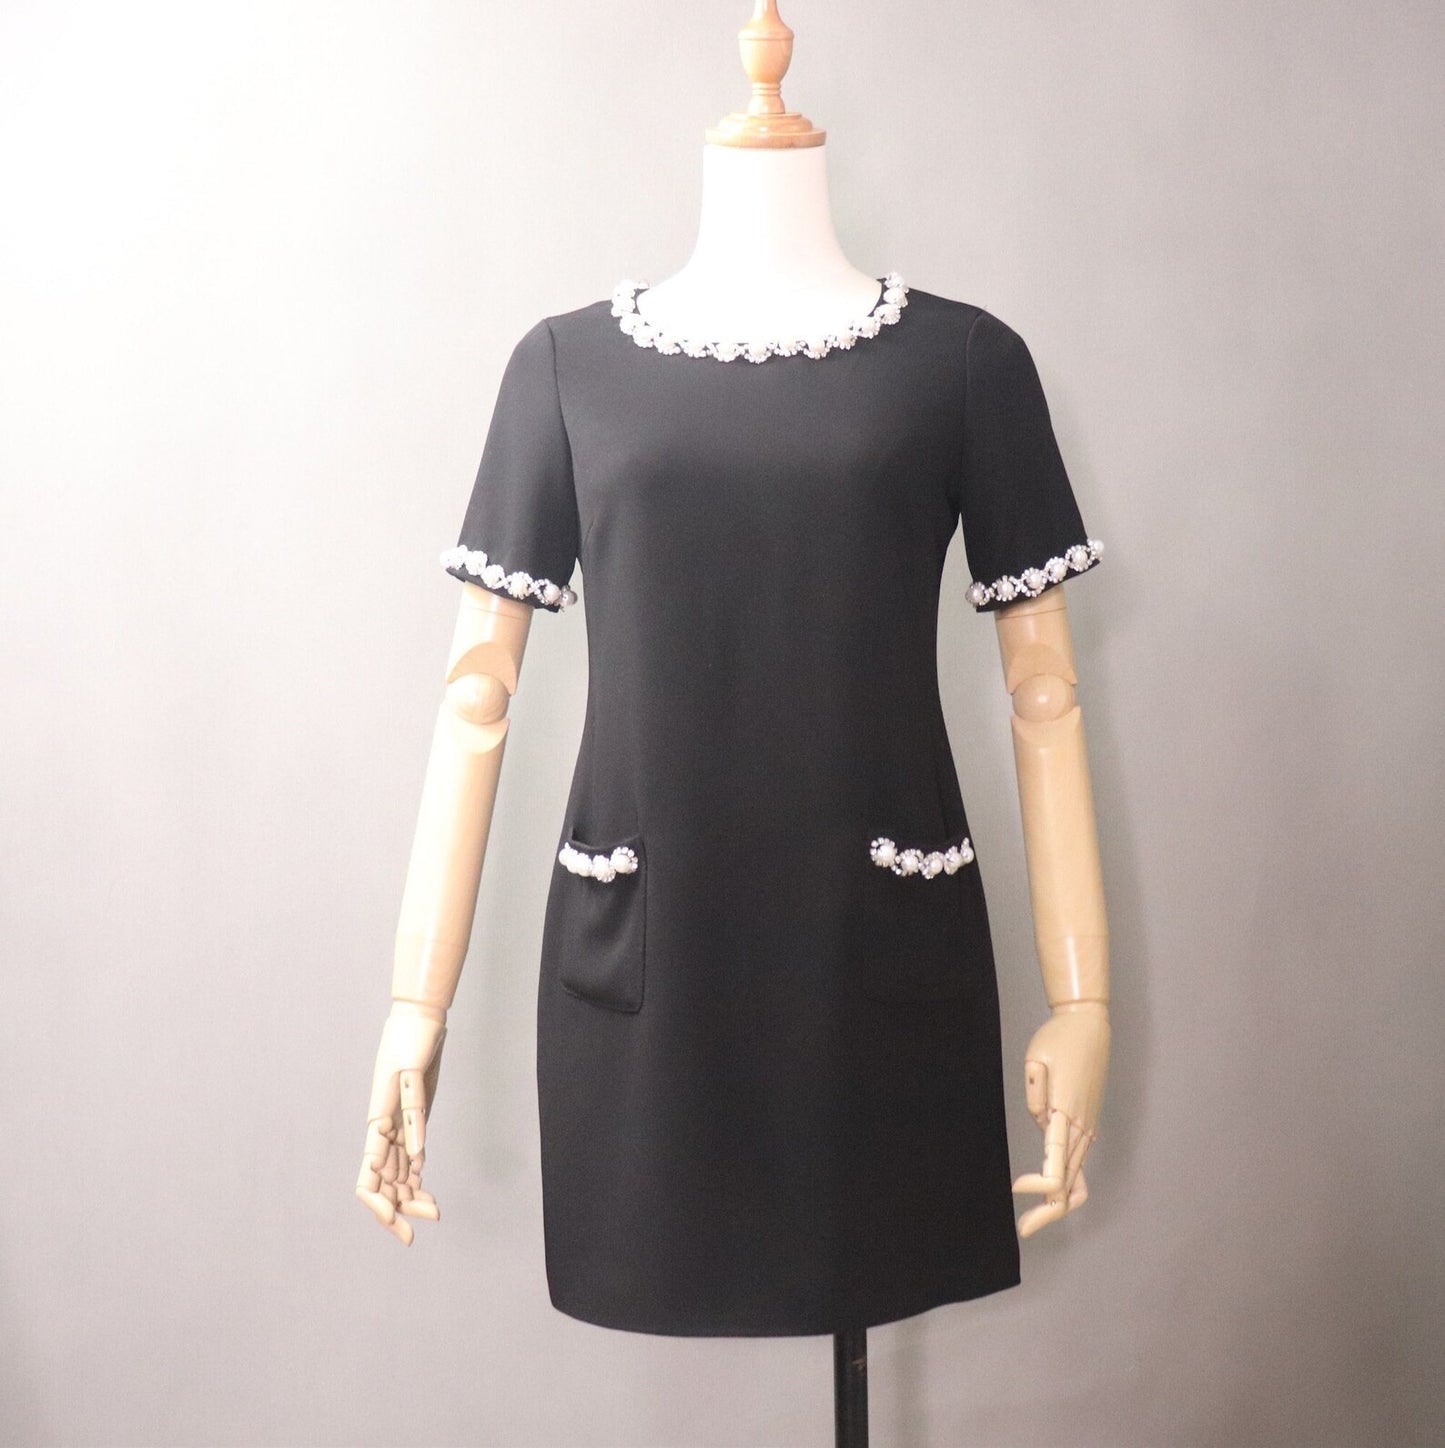 Women's Tailor Custom Made Pearl Jewellery Decoration Dress Black UK CUSTOMER SERVICE!  Women's Tailor Custom Made Pearl Jewellery Decoration Dress Black - Round neck with pearl decorated design. Half selves with simple wrap waist design, and useful for nearly any occasion. Short sleeve, Round neck, floral patterned with both side pockets design, breathable, skin-touch, makes you feeling relaxed and comfortable.  All items are made to order. Please advise your height, weight and body measurements